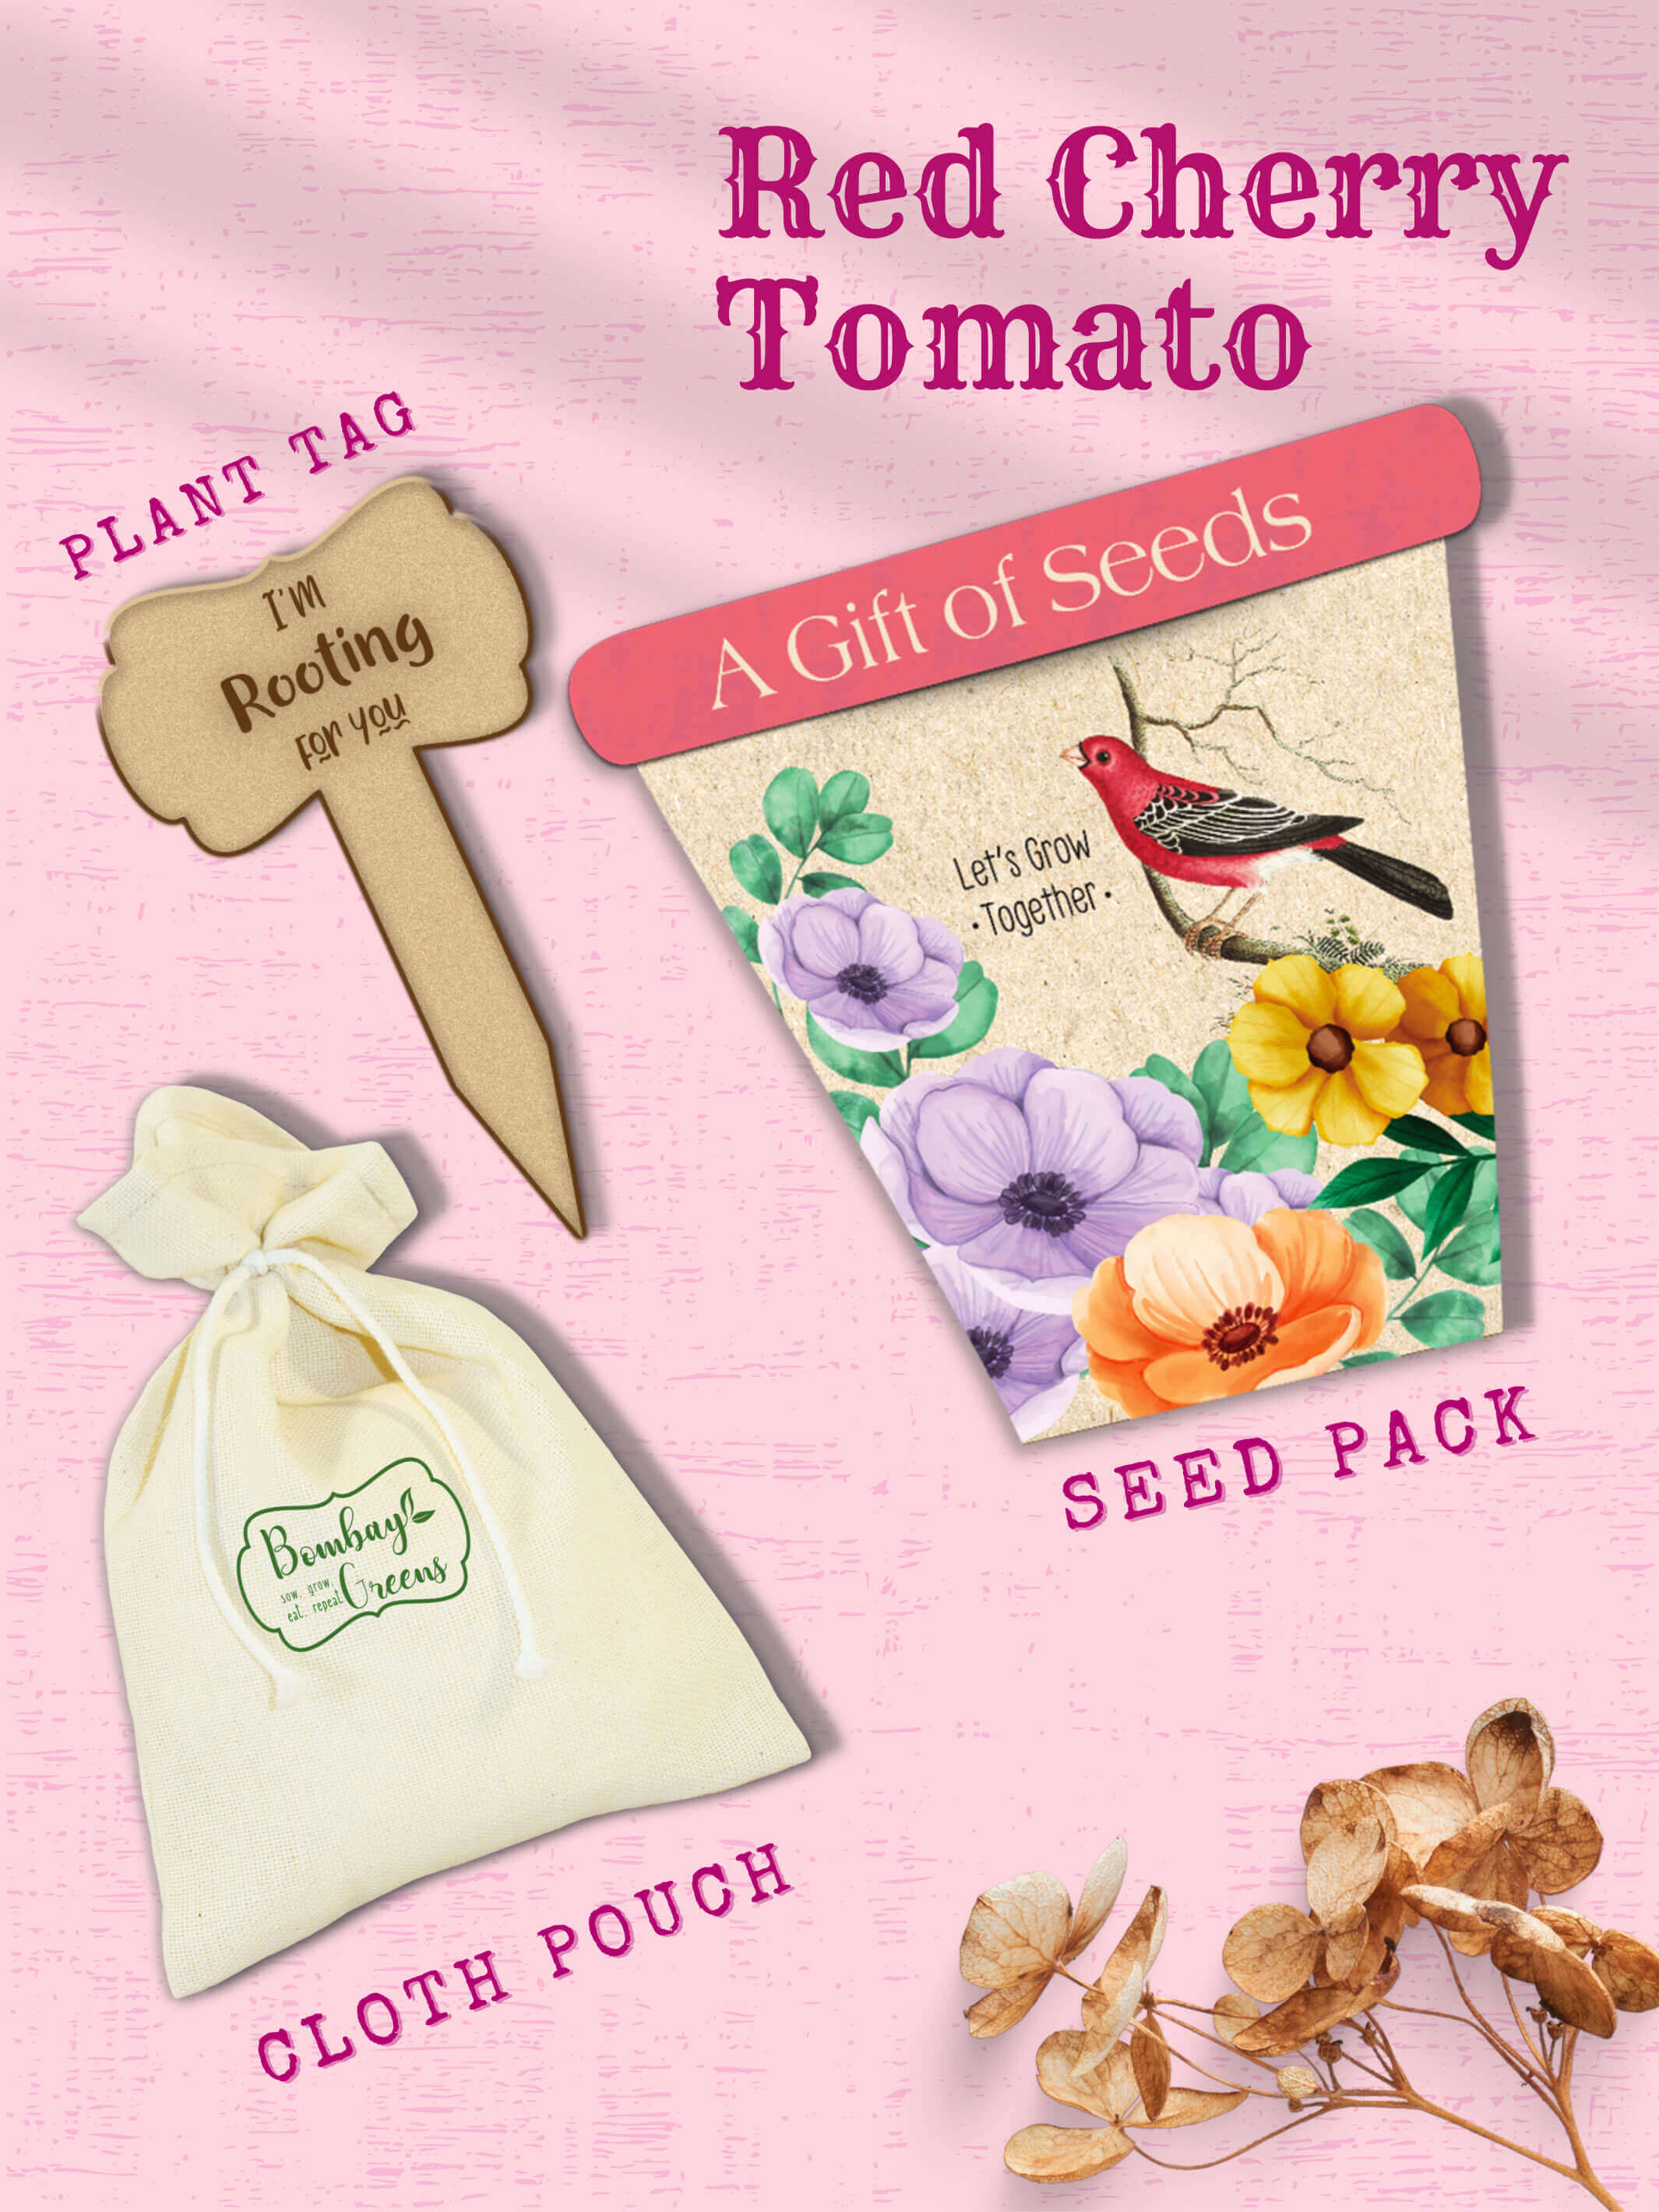 Gift of seeds-Red cherry tomato seeds